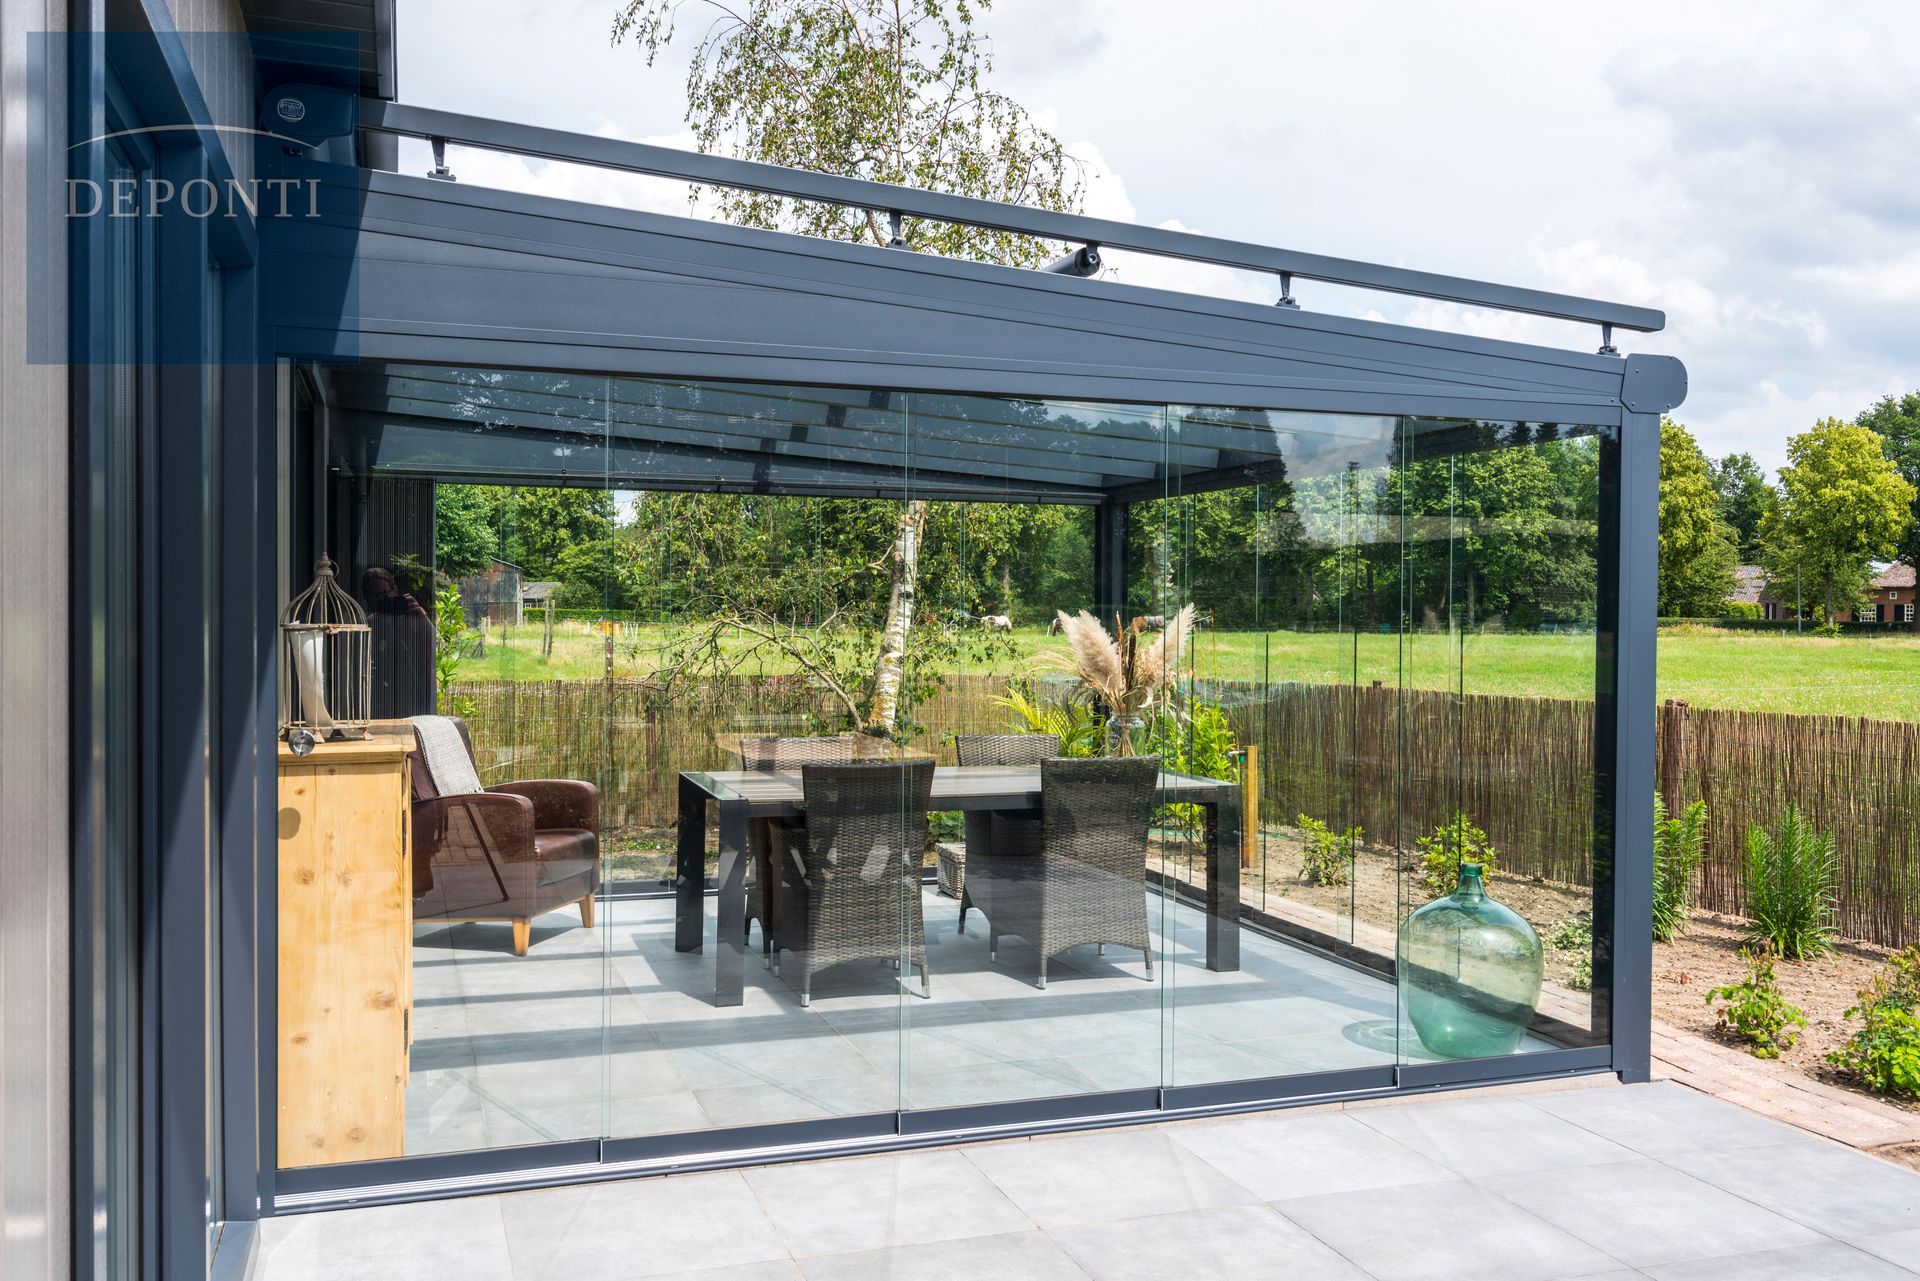 Deponti aluminium veranda with glass sliding panels to the side and front and a table and chairs under the canopy